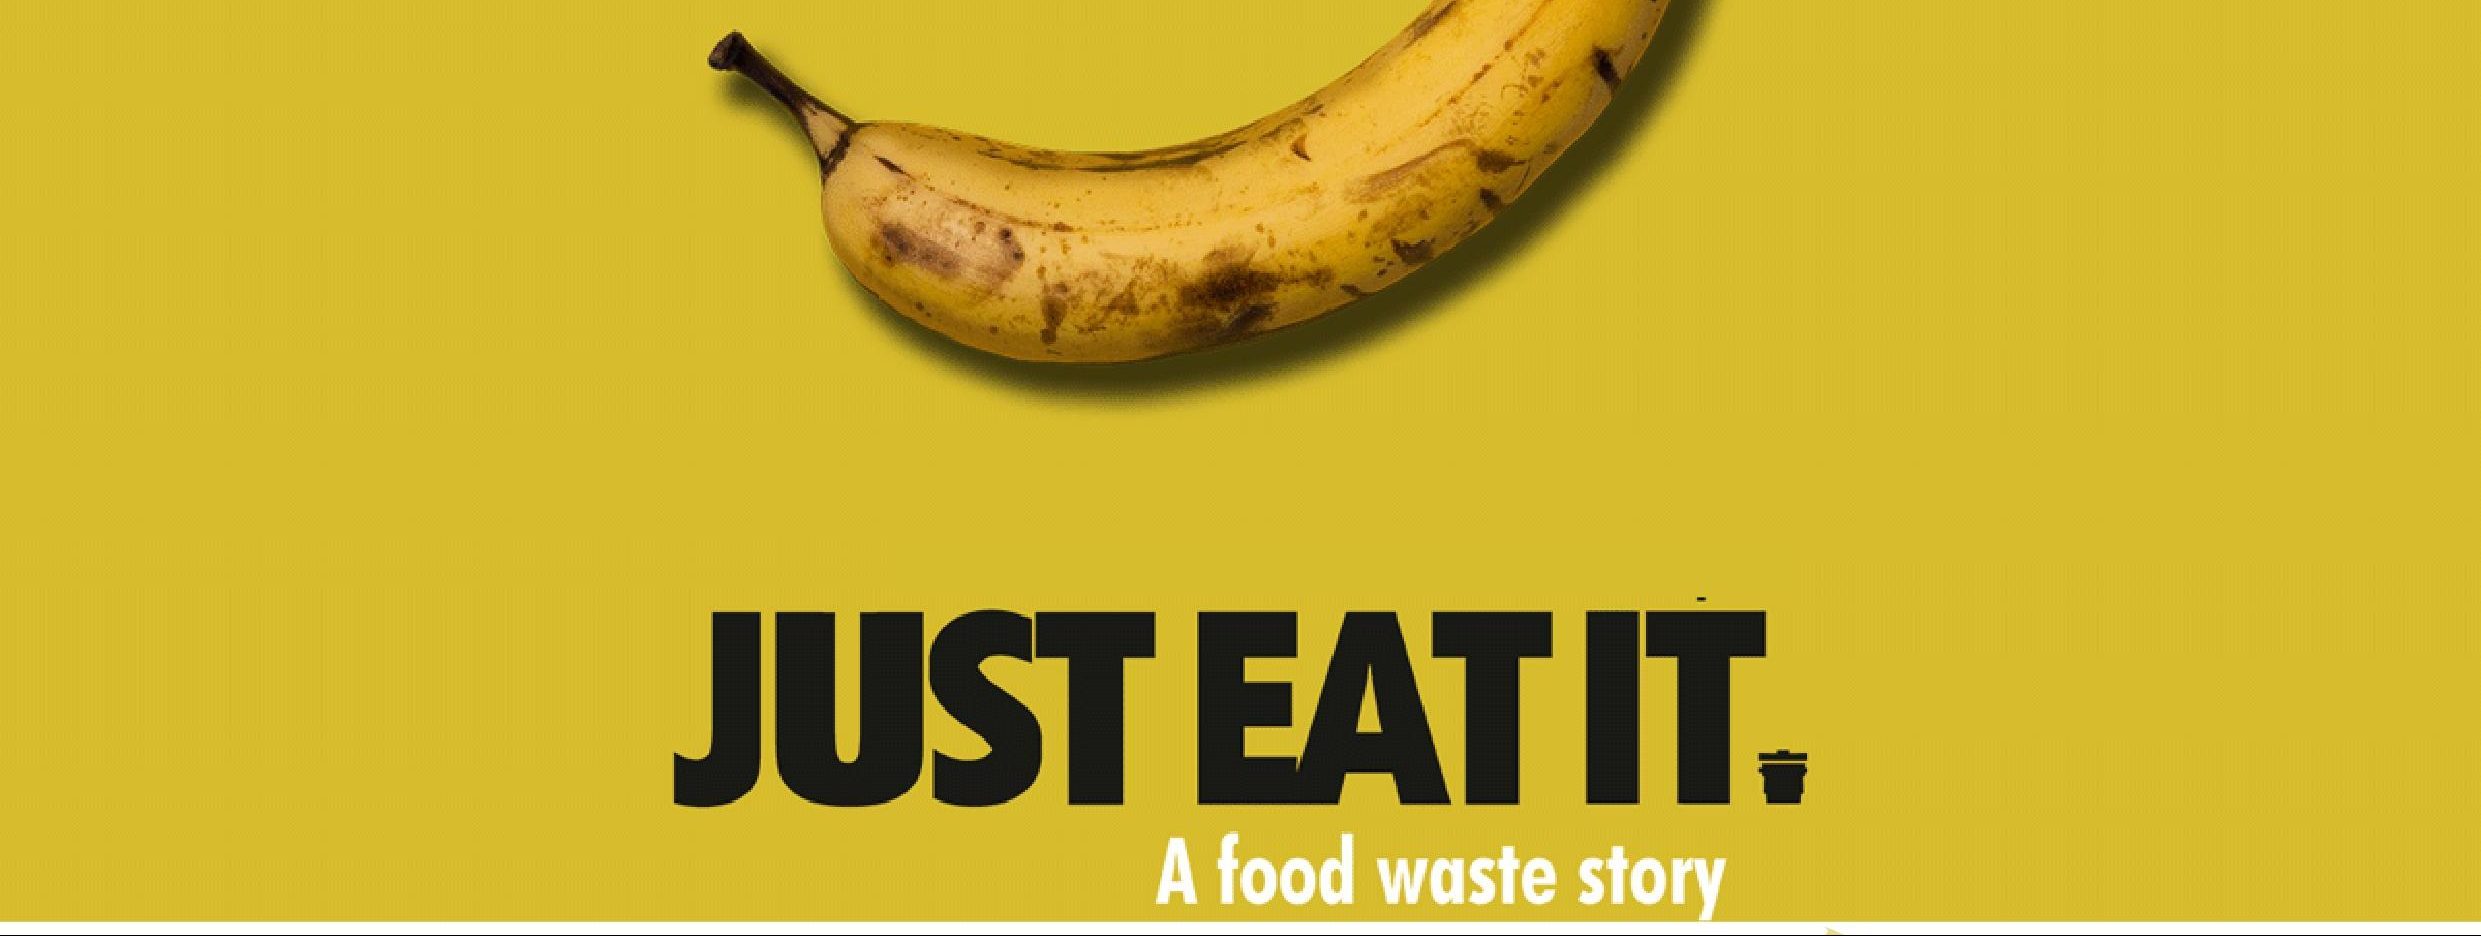 Proiezione documentario “Just Eat it: a food waste story”